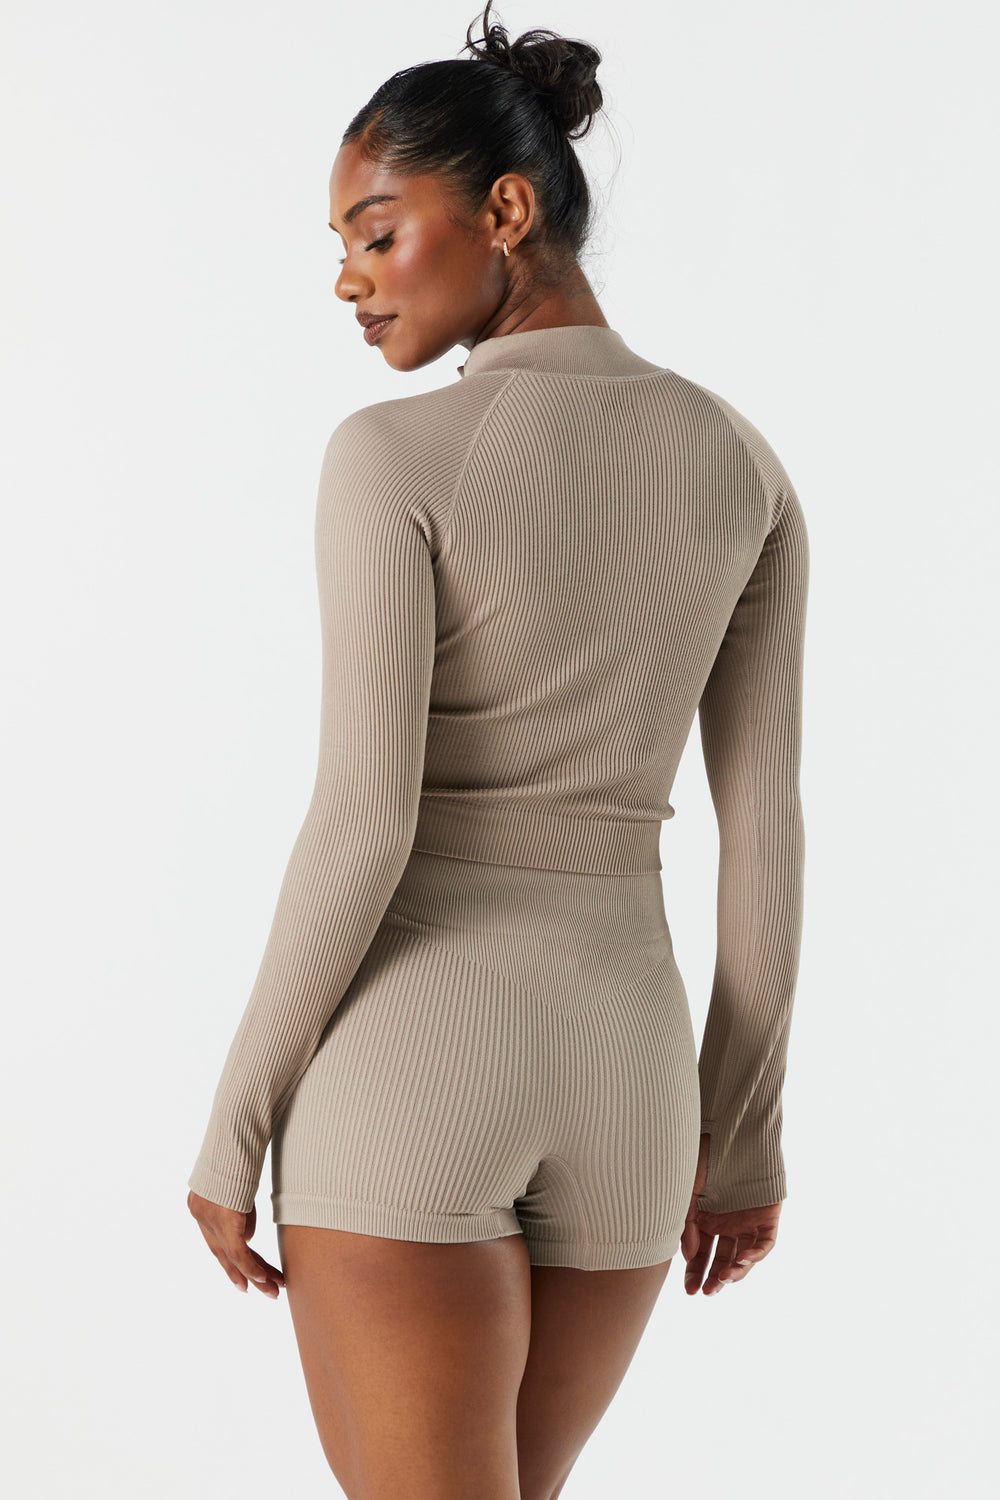 Sommer Ray Seamless Ribbed Quarter Zip Active Top Sommer Ray Seamless Ribbed Quarter Zip Active Top 14